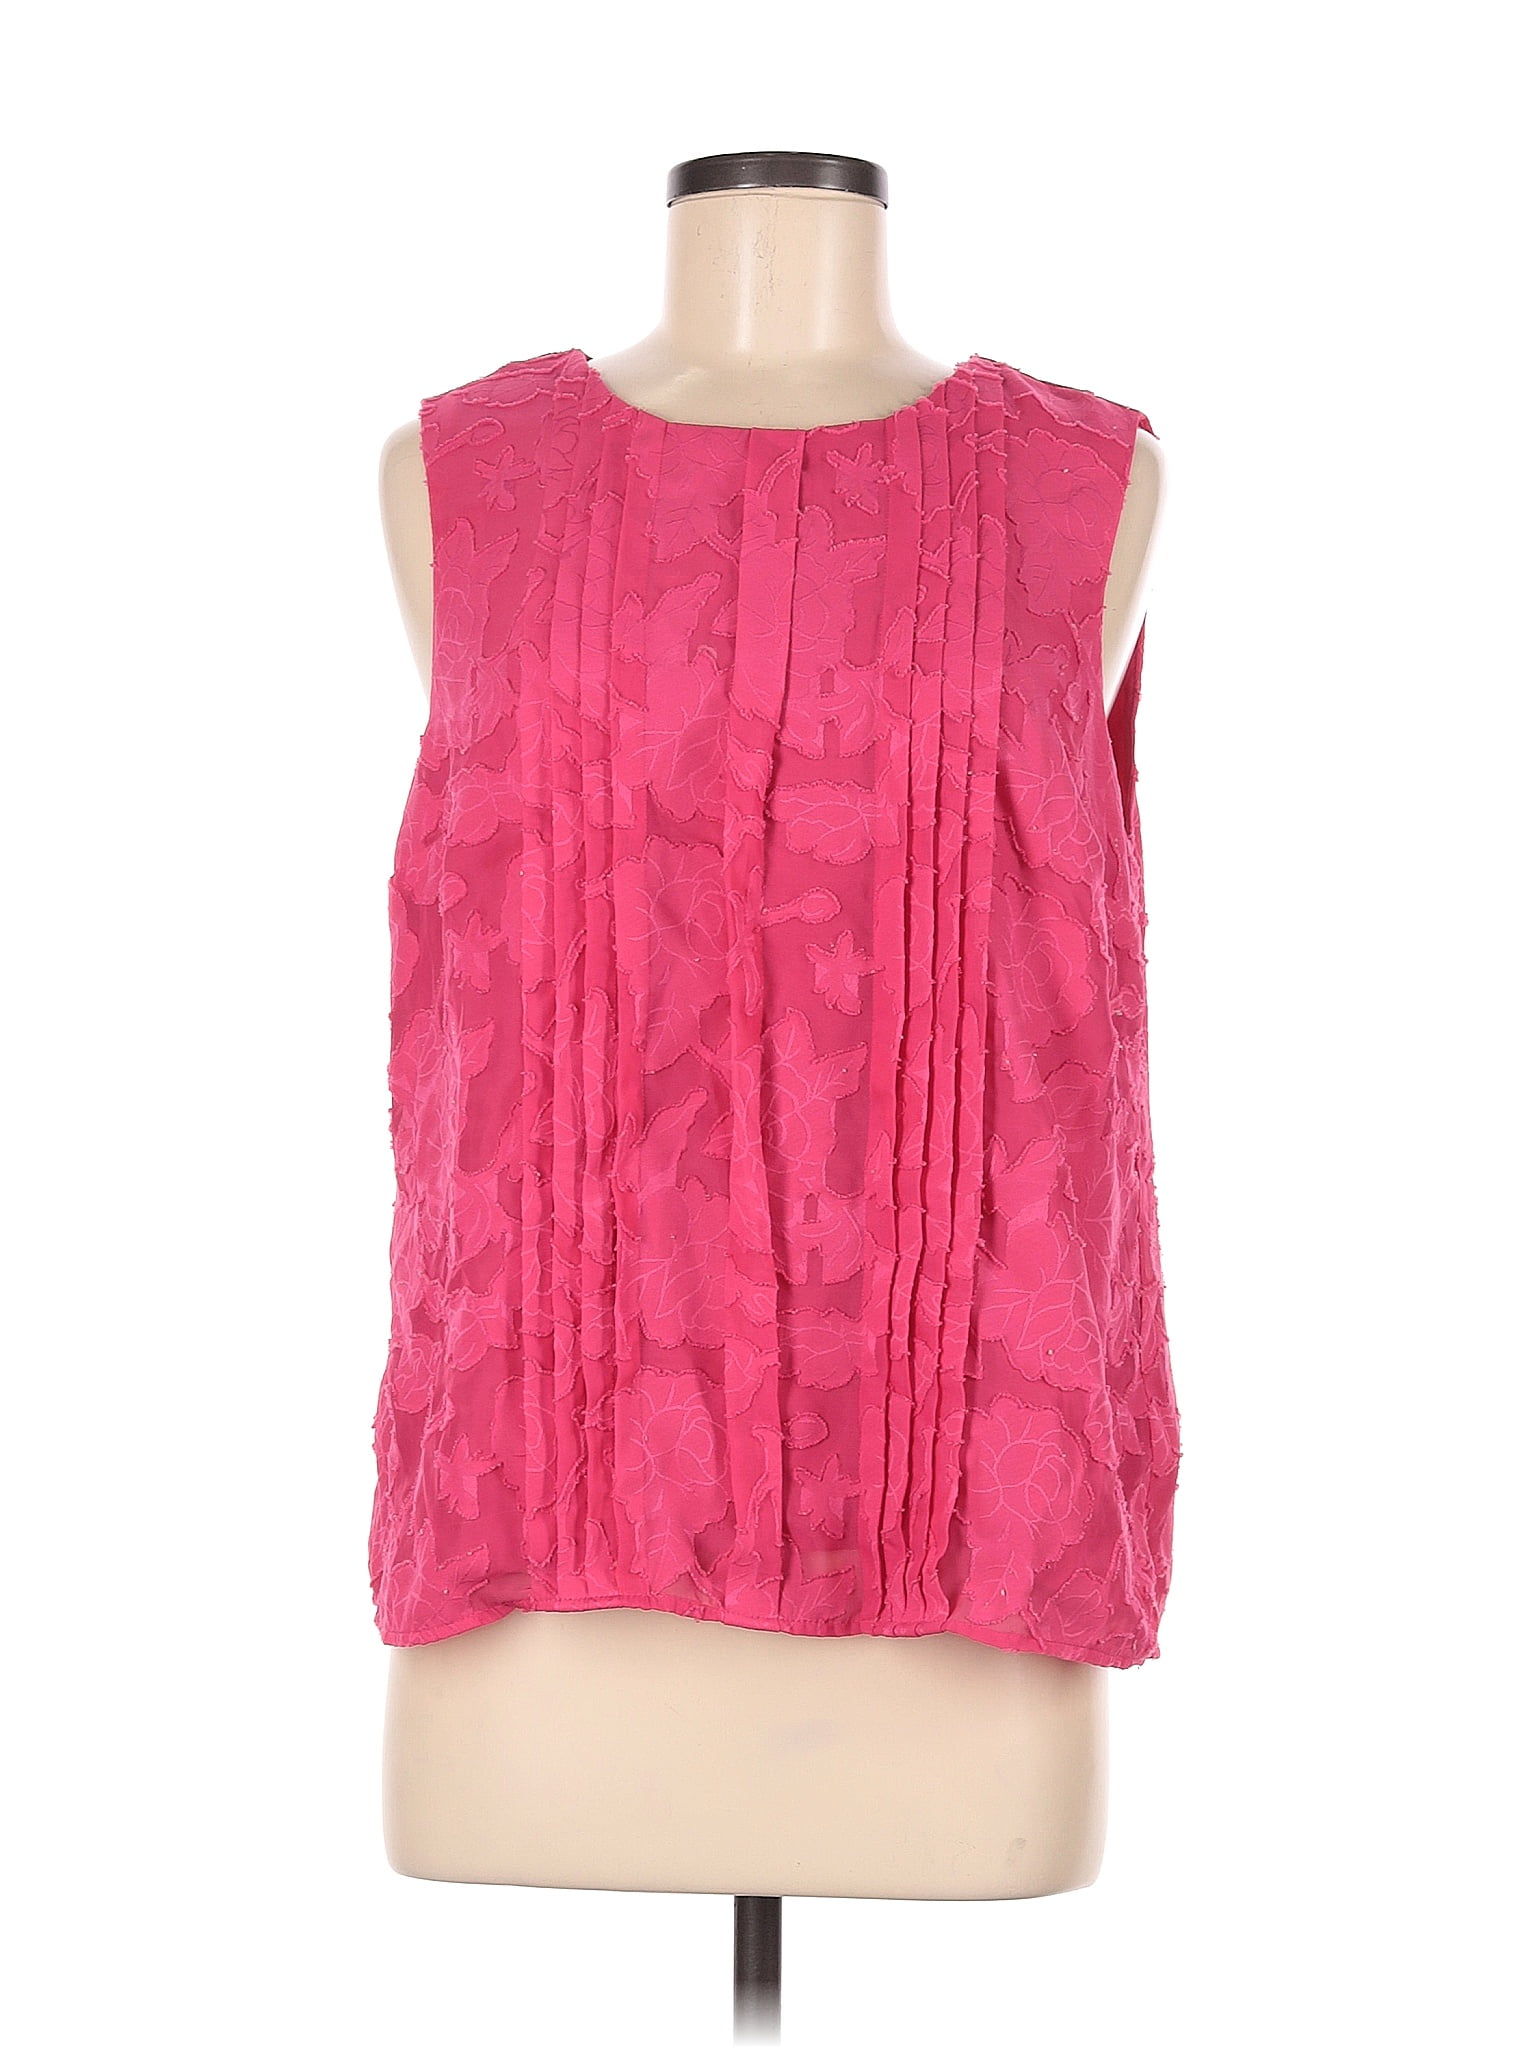 CeCe 100% Polyester Pink Sleeveless Blouse Size M - 75% off